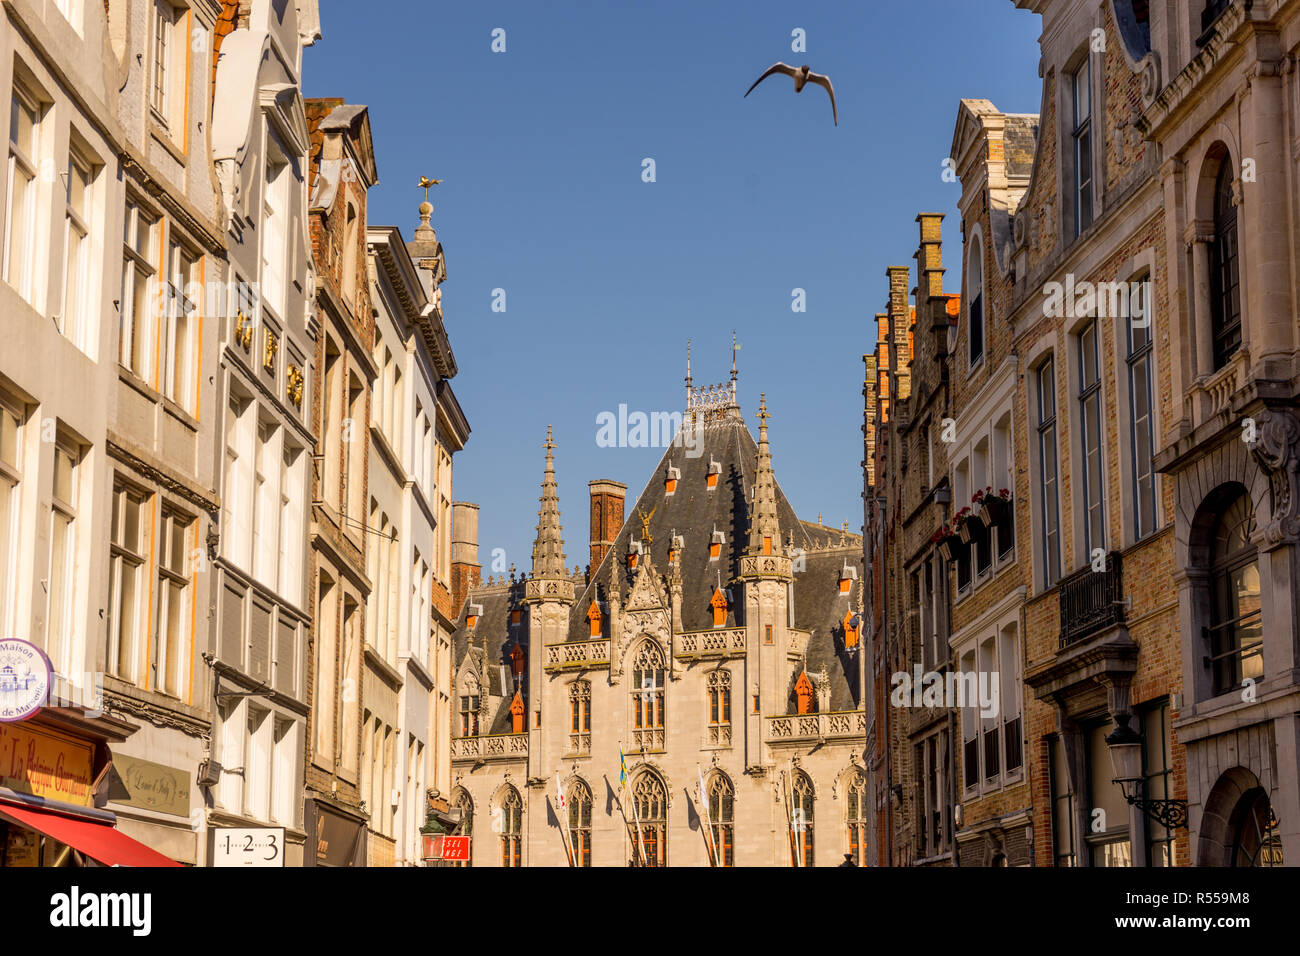 Bruges, Belgium - 17 February 2018: A bird flies over the palace in Bruges Stock Photo